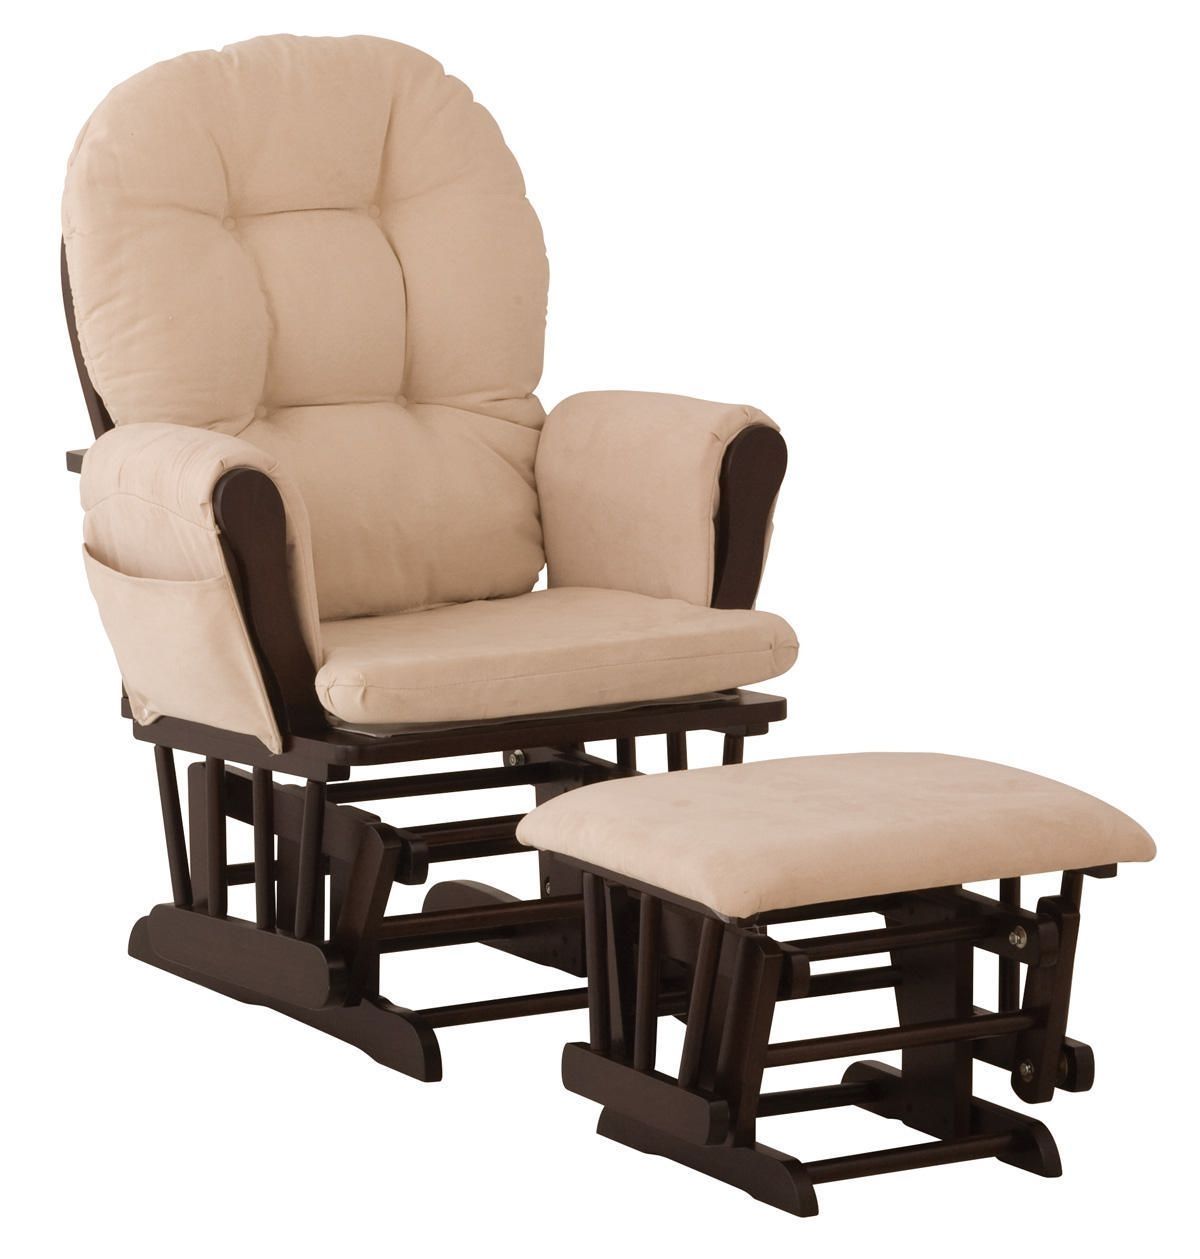 Baby Rocking Chair Walmart – Home – Furniture Ideas With Rocking Chairs At Walmart (Photo 12 of 15)